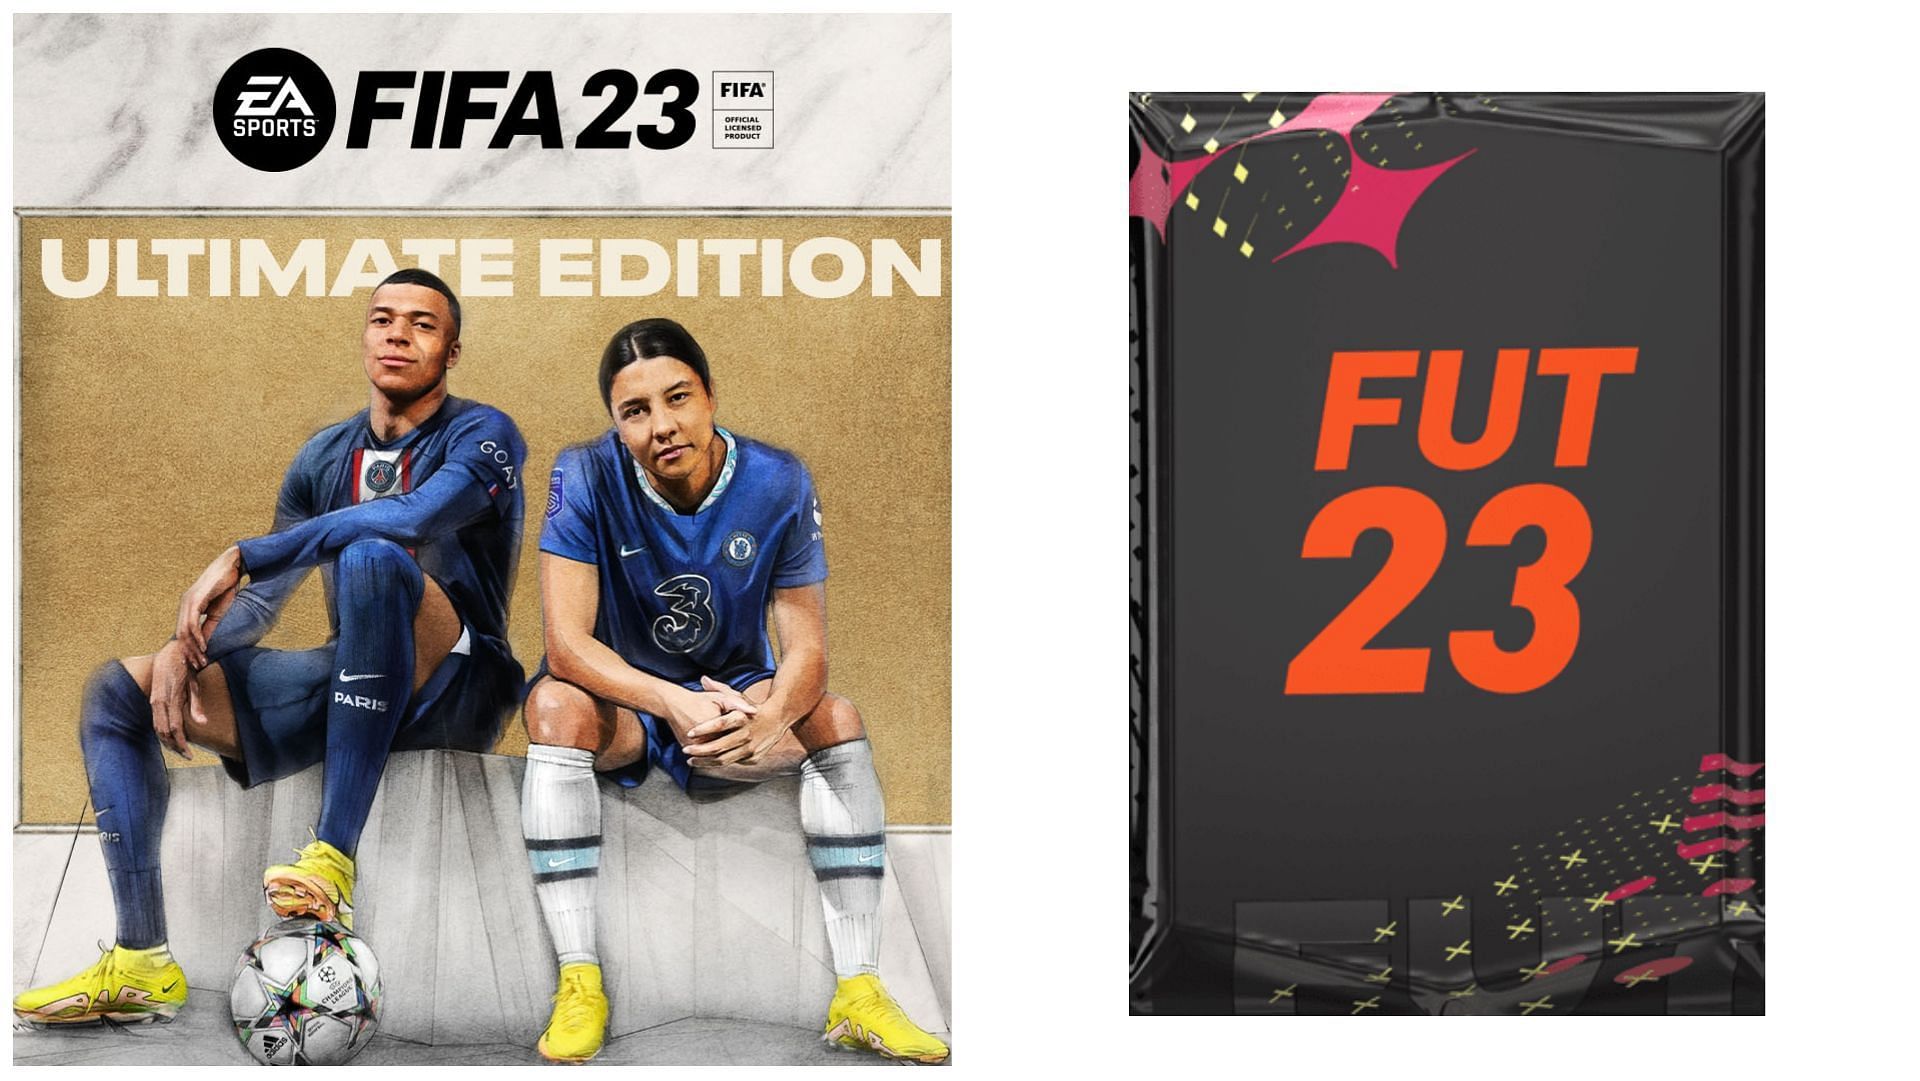 $70 for FIFA 23, and Free-to-Play Card Pack Model on top of that